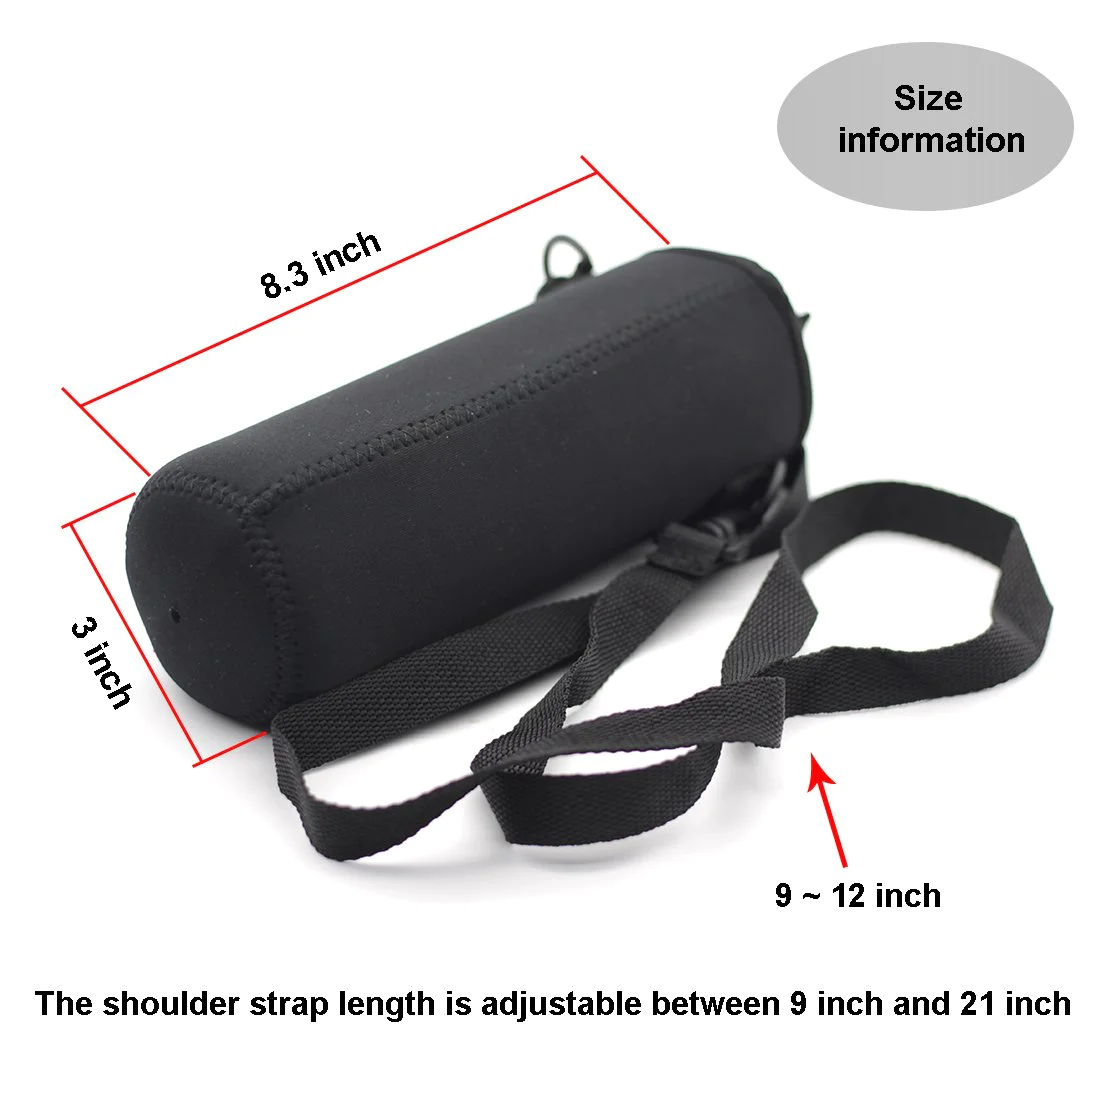 protected Neoprene bag with accessories pocket for travel